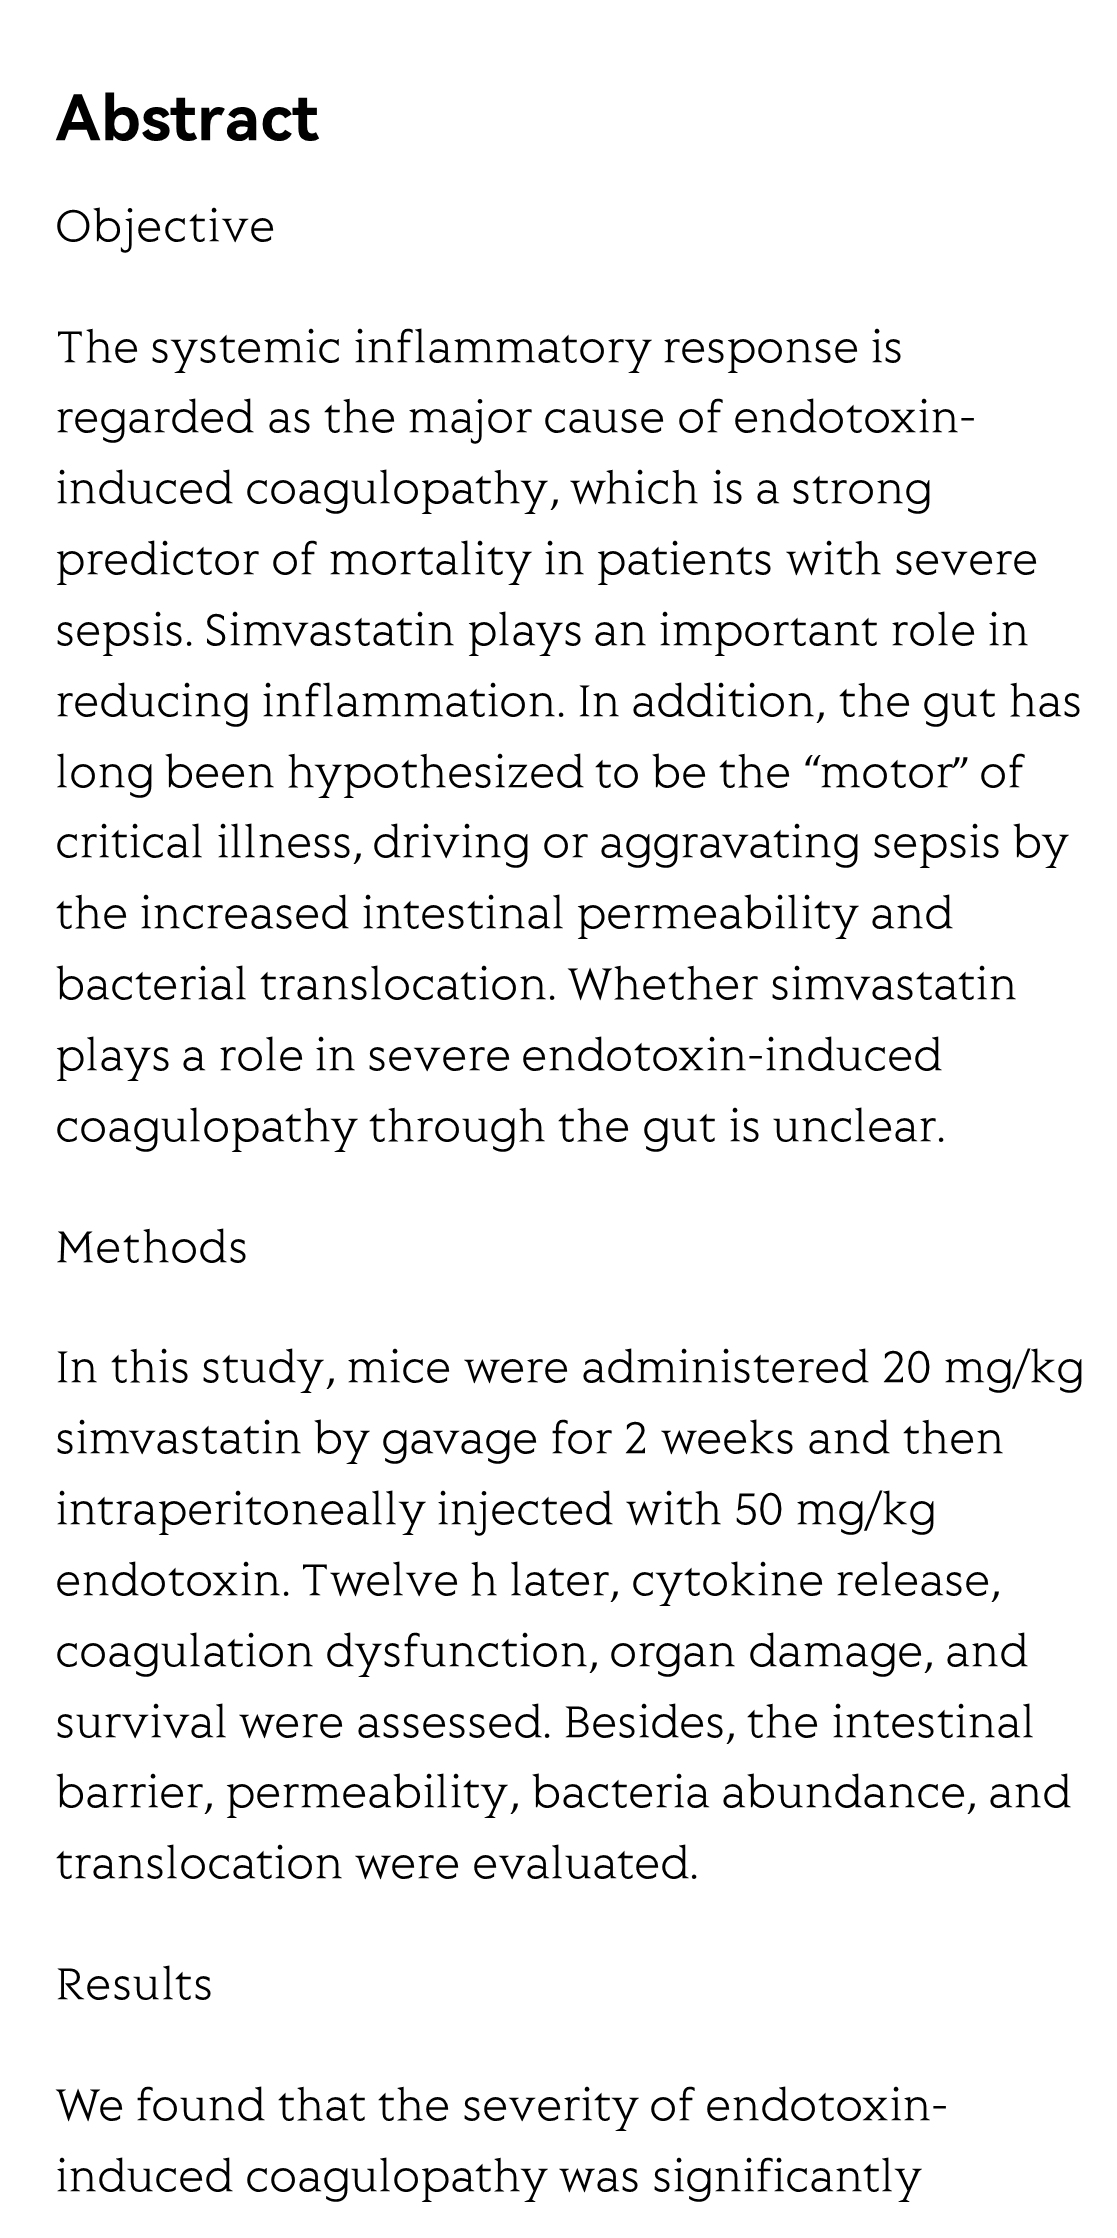 Simvastatin Improves Outcomes of Endotoxin-induced Coagulopathy by Regulating Intestinal Microenvironment_2